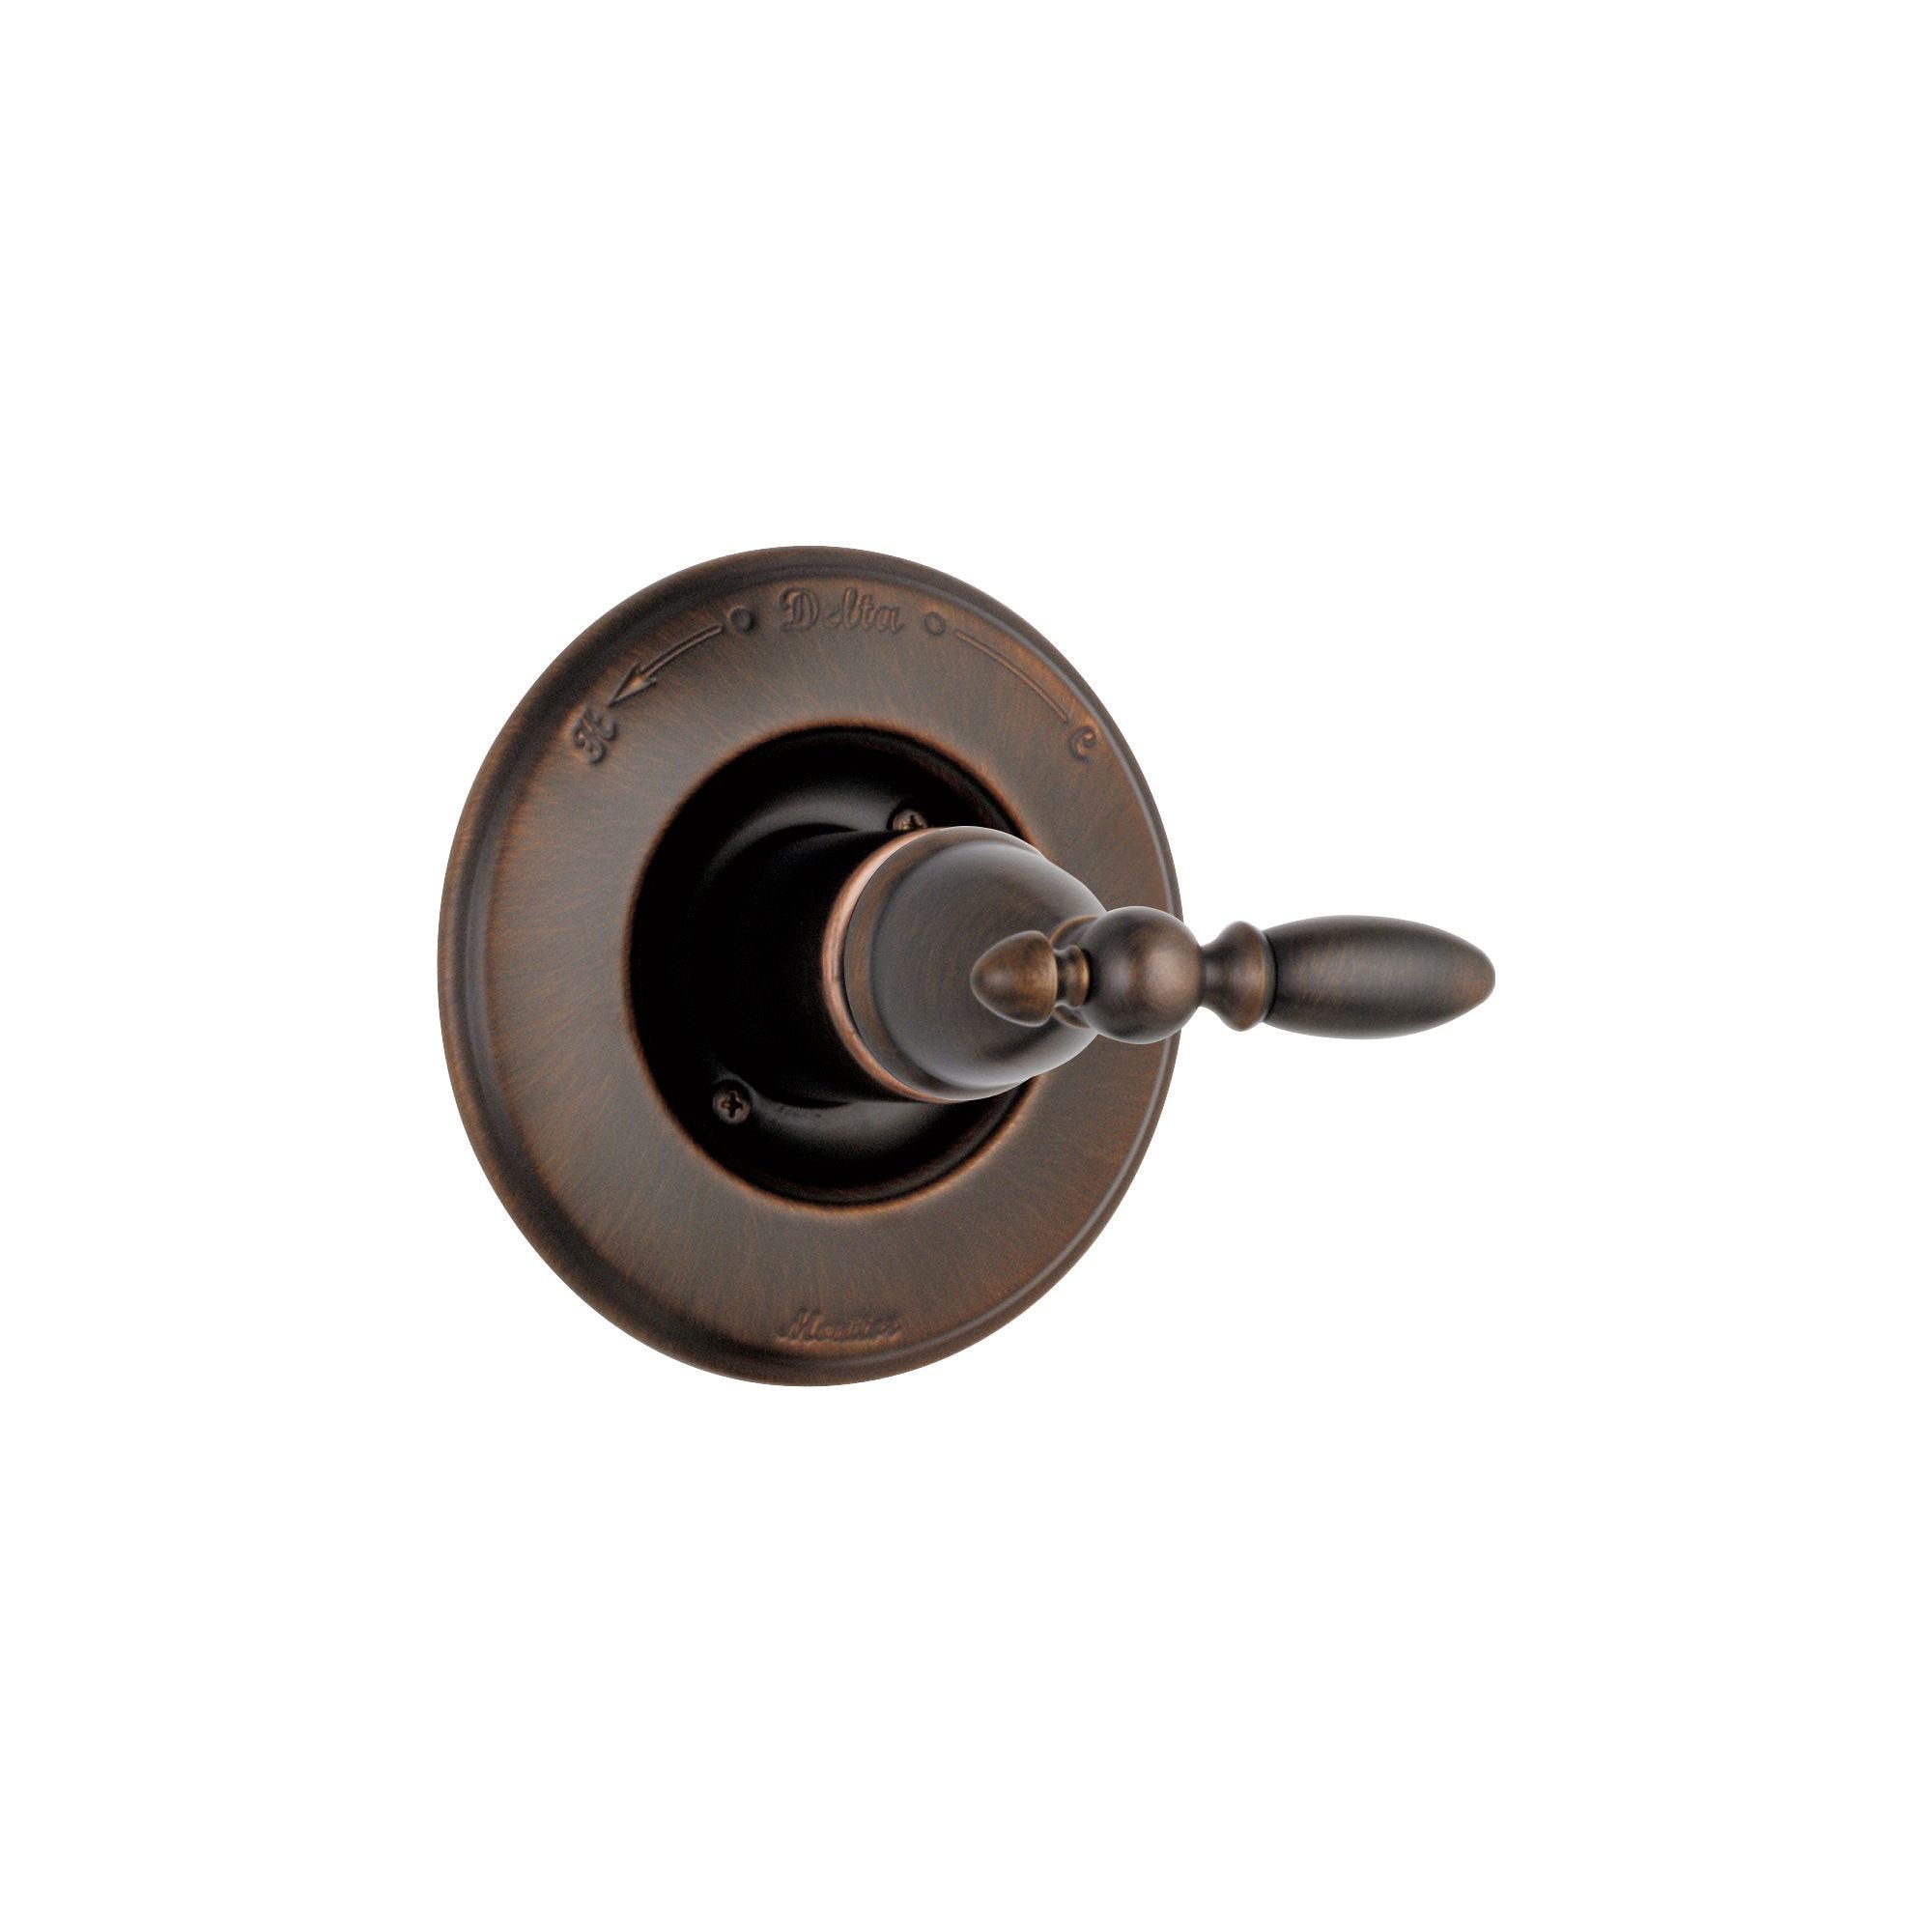 Delta Victorian Monitor 14 Series Venetian Bronze Finish Pressure Balanced Shower Faucet Control INCLUDES Rough-in Valve and Single Lever Handle D1264V